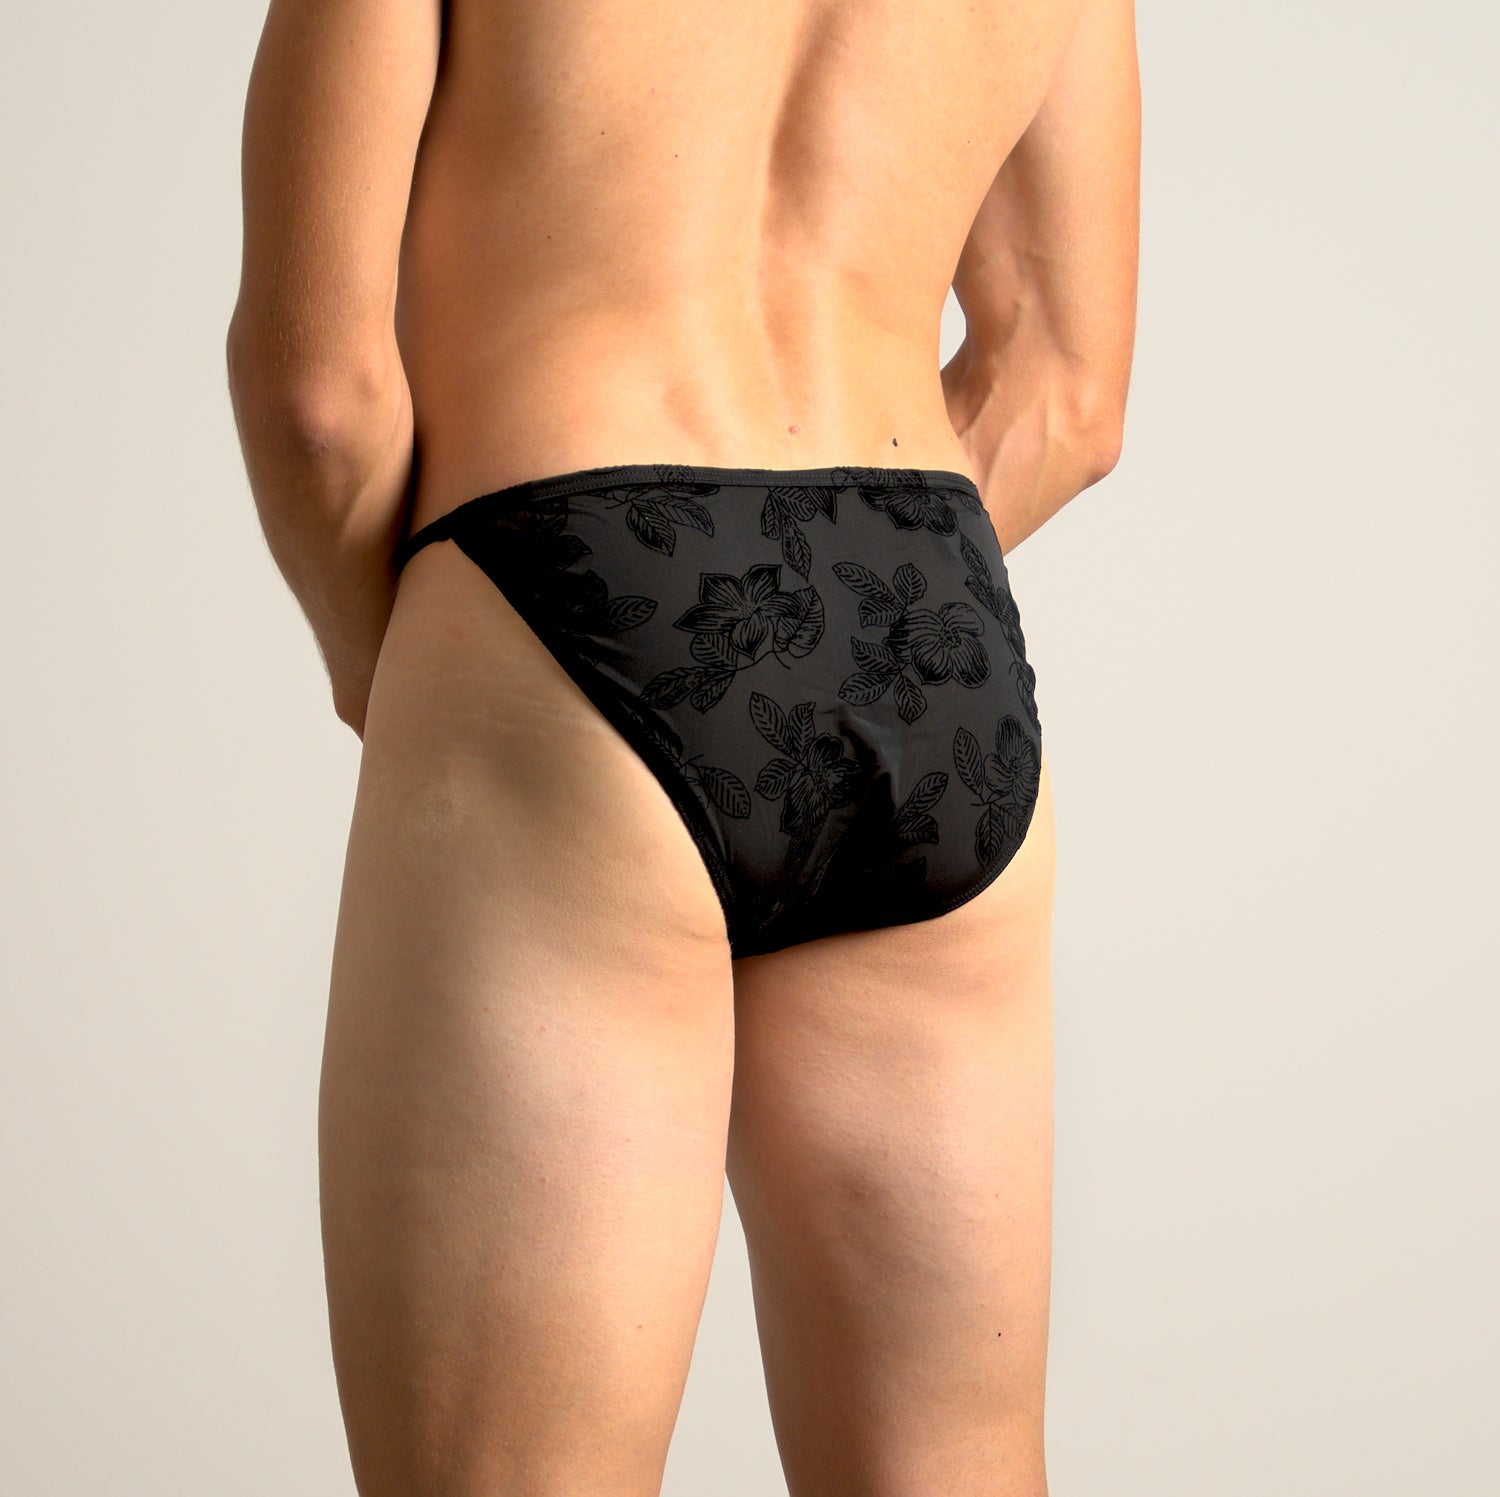 Etseo Luxury Bikini Tanga Black is part of the Etseo Luxury Men's Underwear Collection of Trunks, Bikini Briefs and Bikini Tangas. Etseo Luxury is  for sure our most luxurious collection of products. Very comfortable and elegant pieces. The fabric, manufactured in Barcelona, ​​is of high quality and soft to the touch. At Etseo we manufacture quality men's underwear.